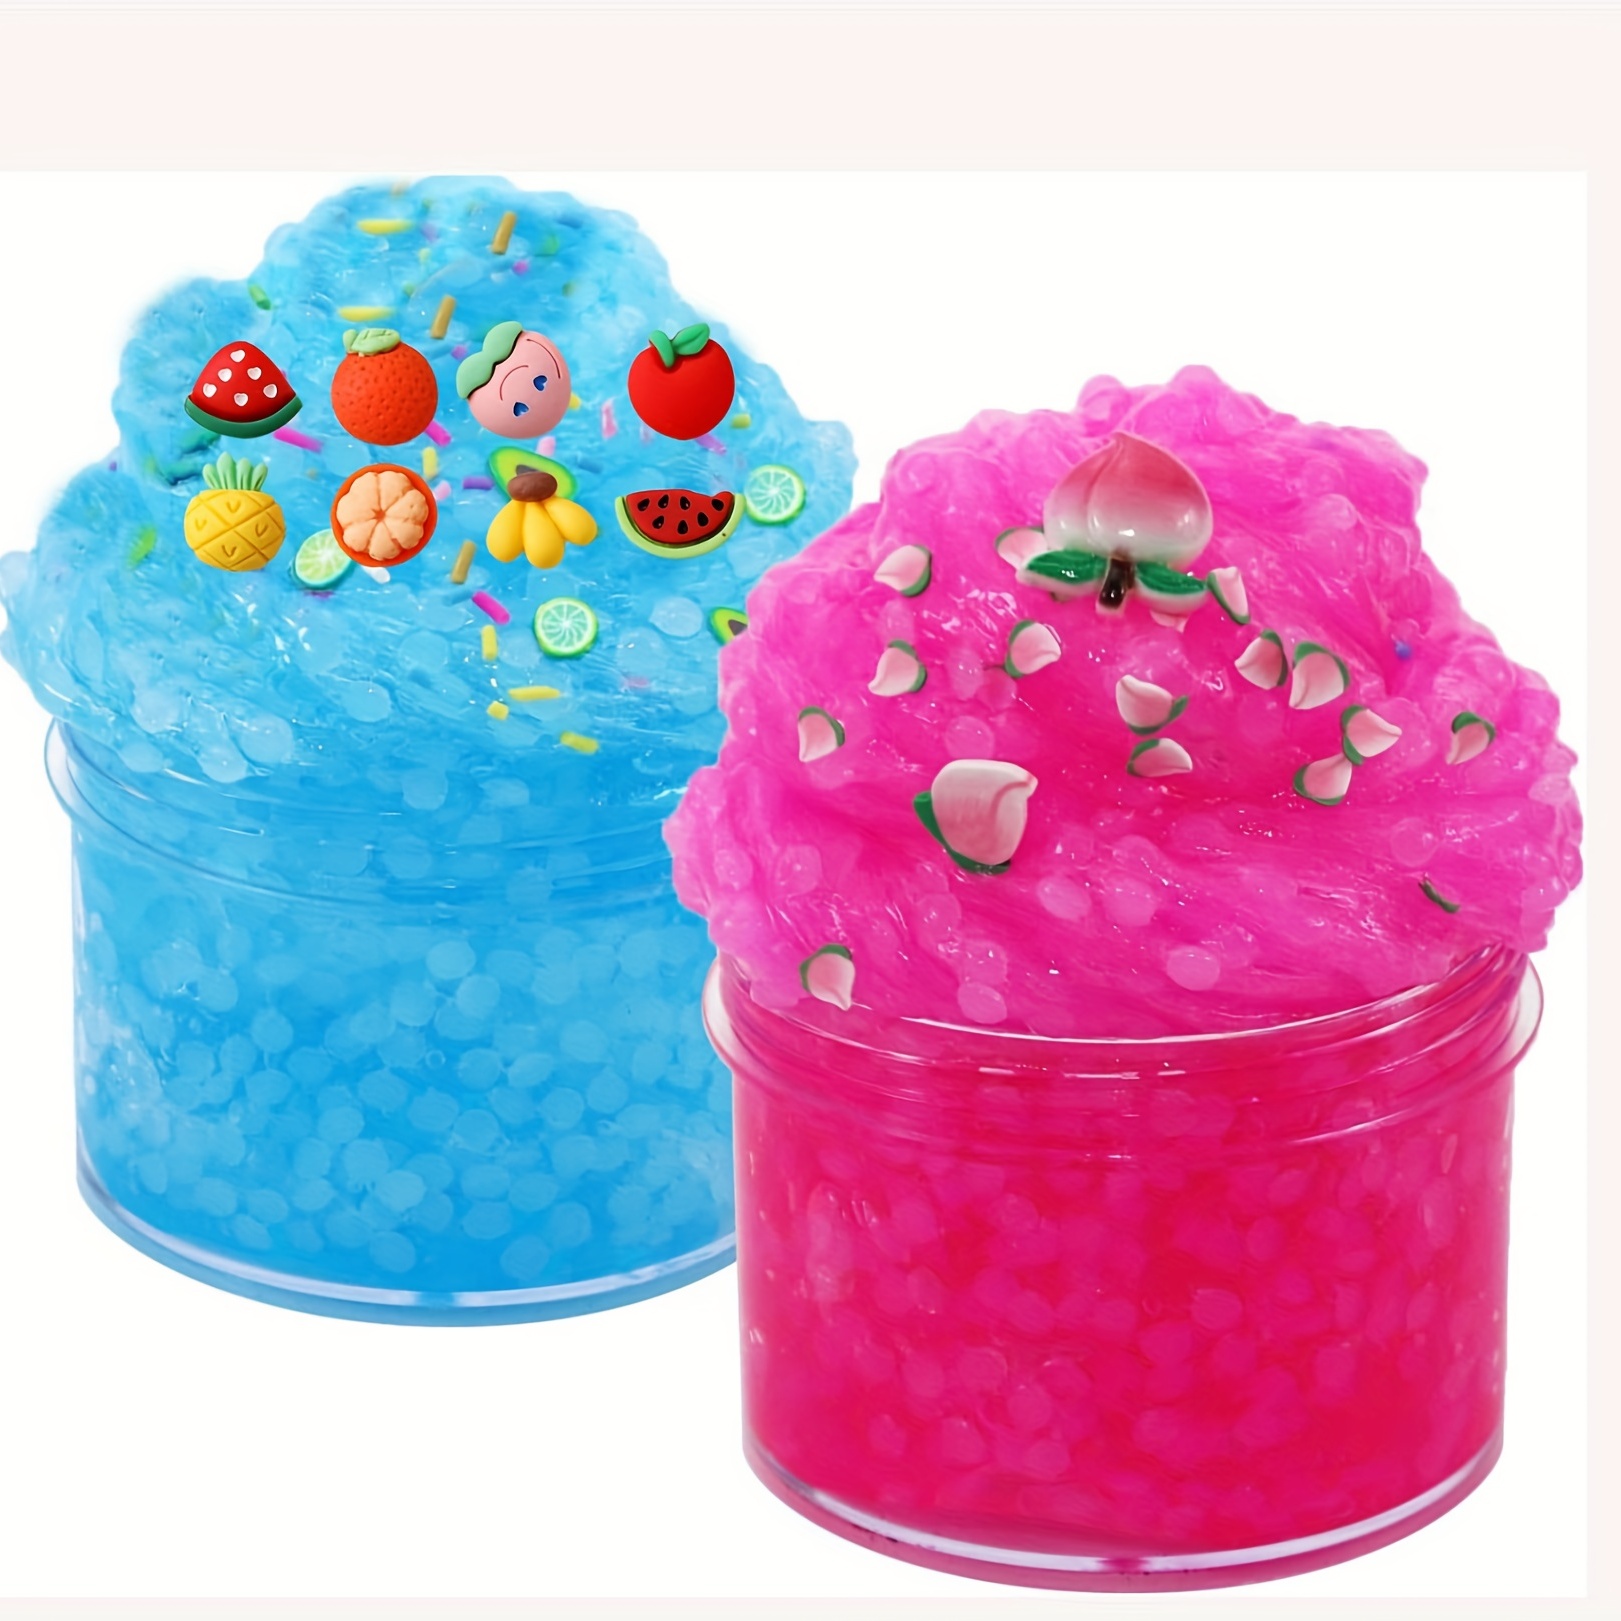 2pcs Cloud Slime Kit With Red Watermelon And Mint Charms, Scented DIY Slime  Supplies For Girls And Boys, Stress Relief Toy For Kids Education, Party F